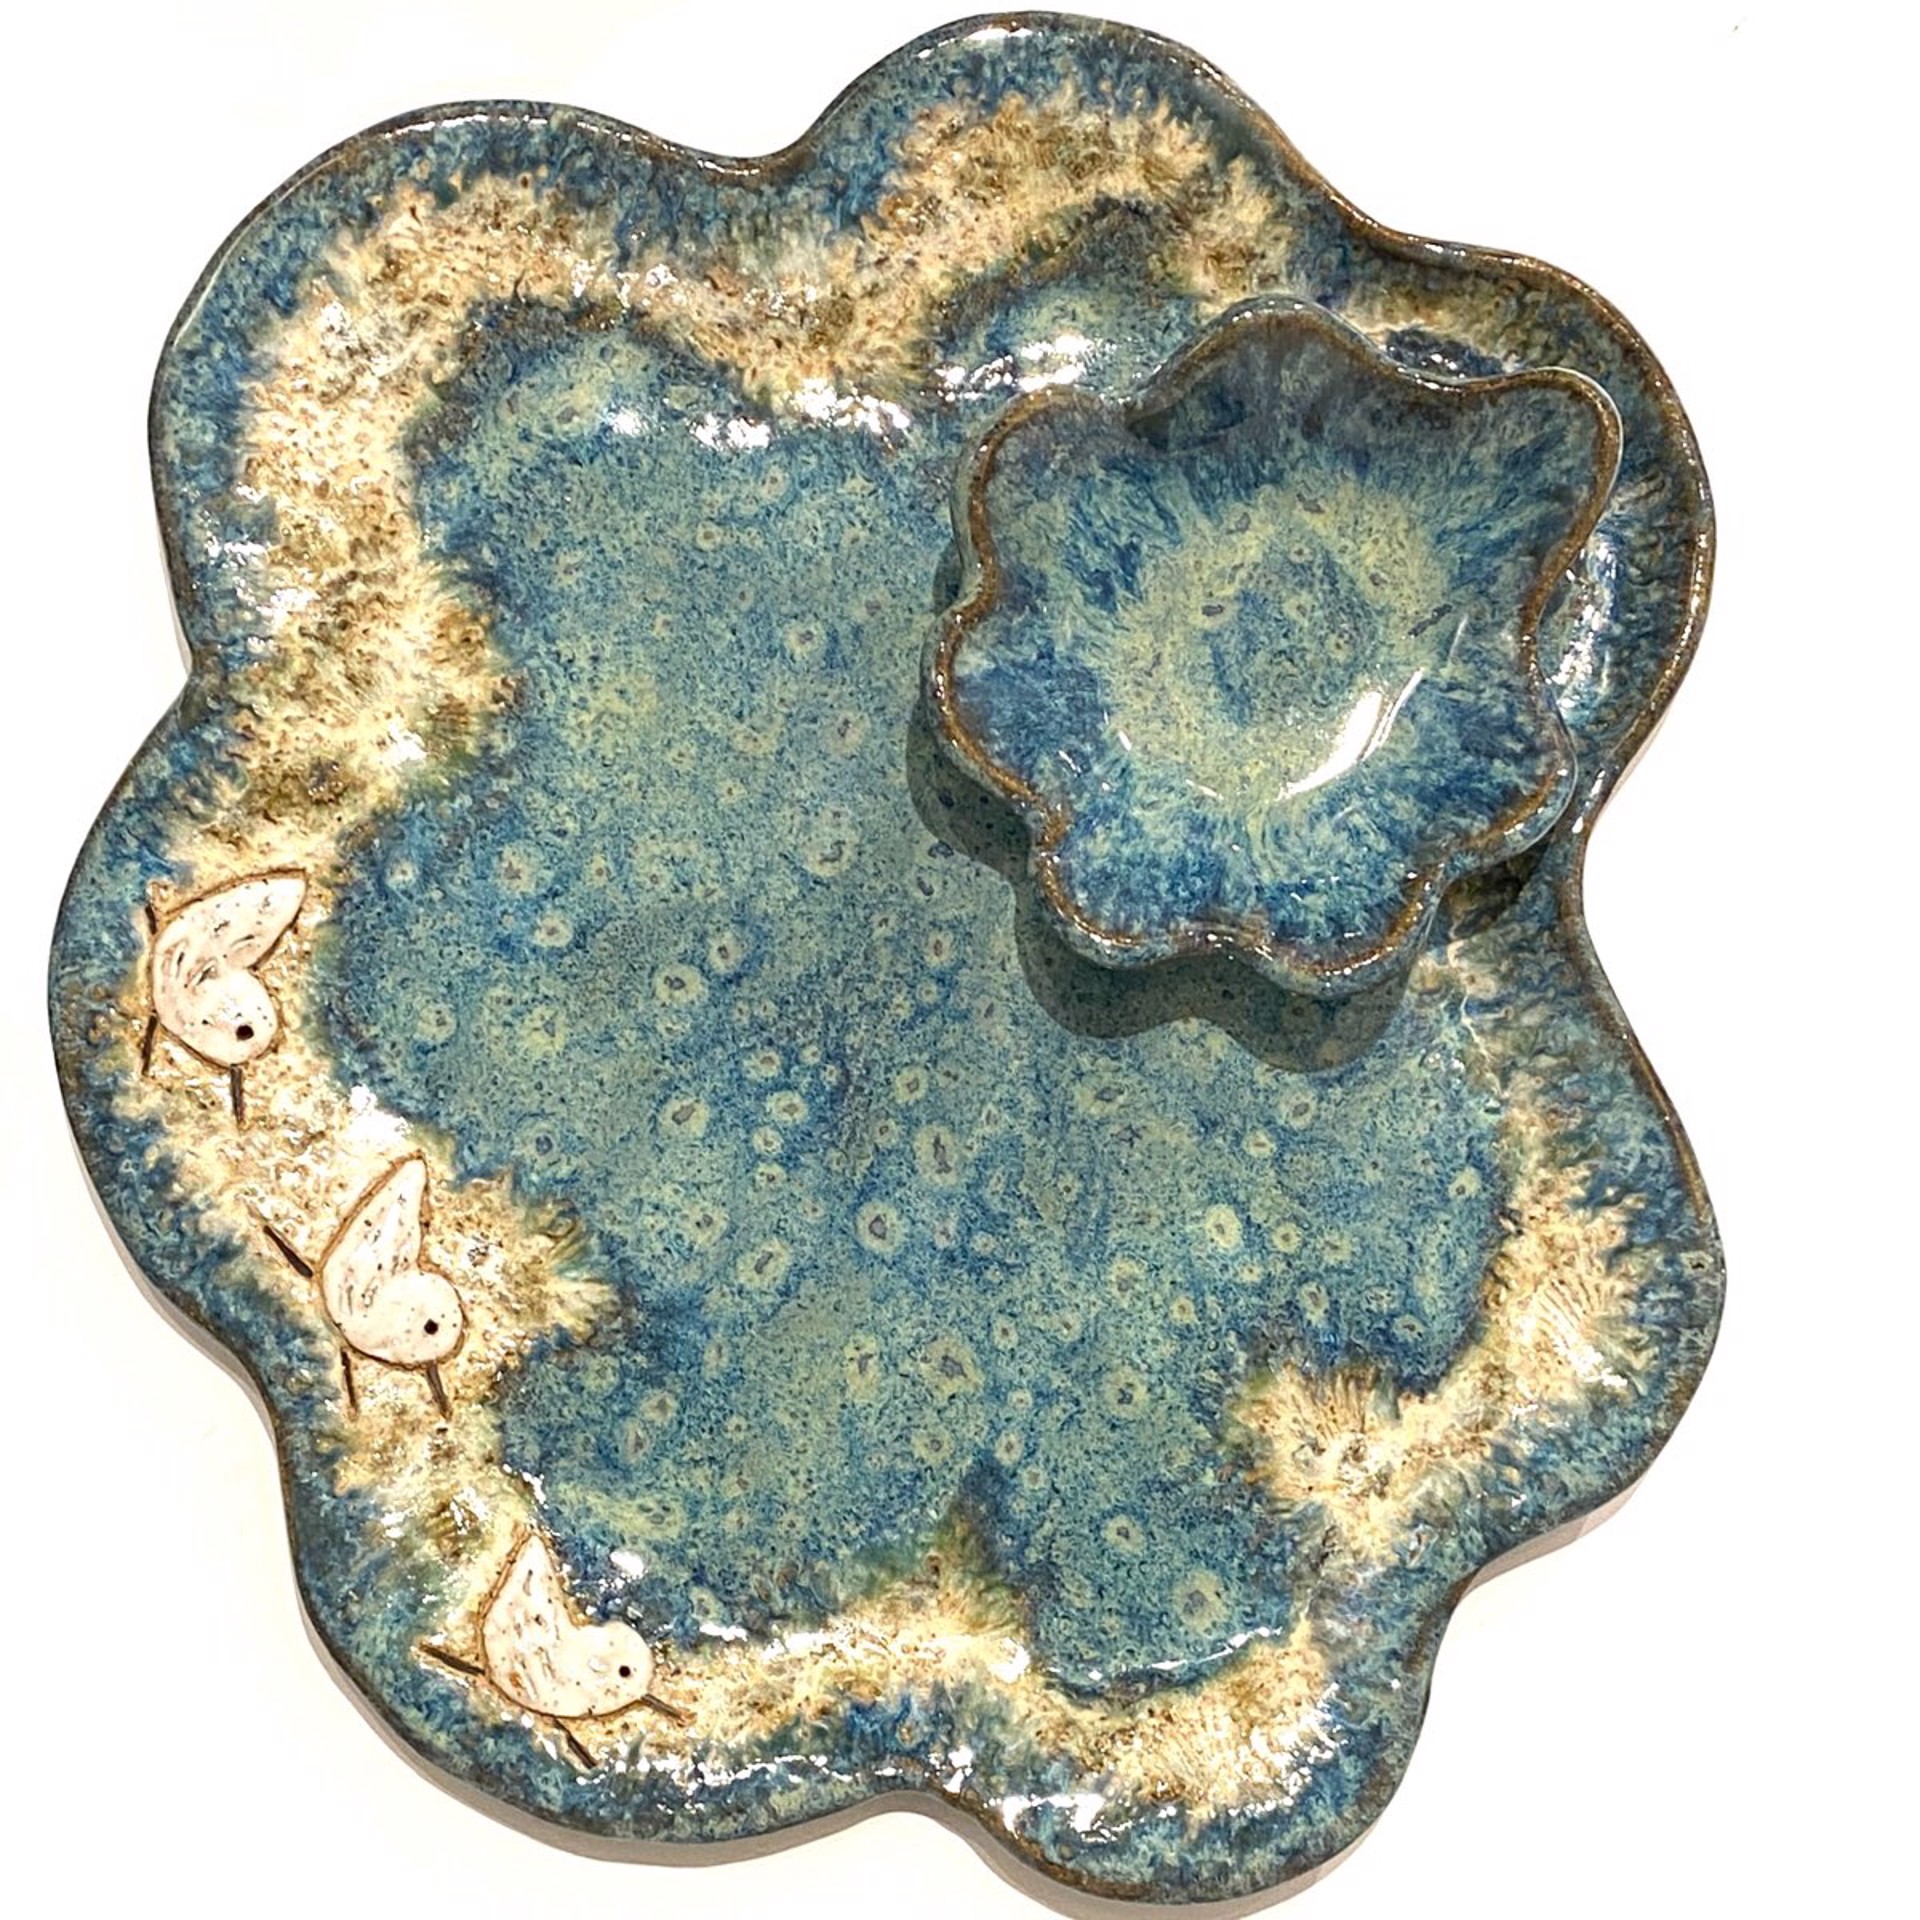 Large Chip N Dip with Three Sandpipers Blue Glaze) LG23-1148 by Jim & Steffi Logan